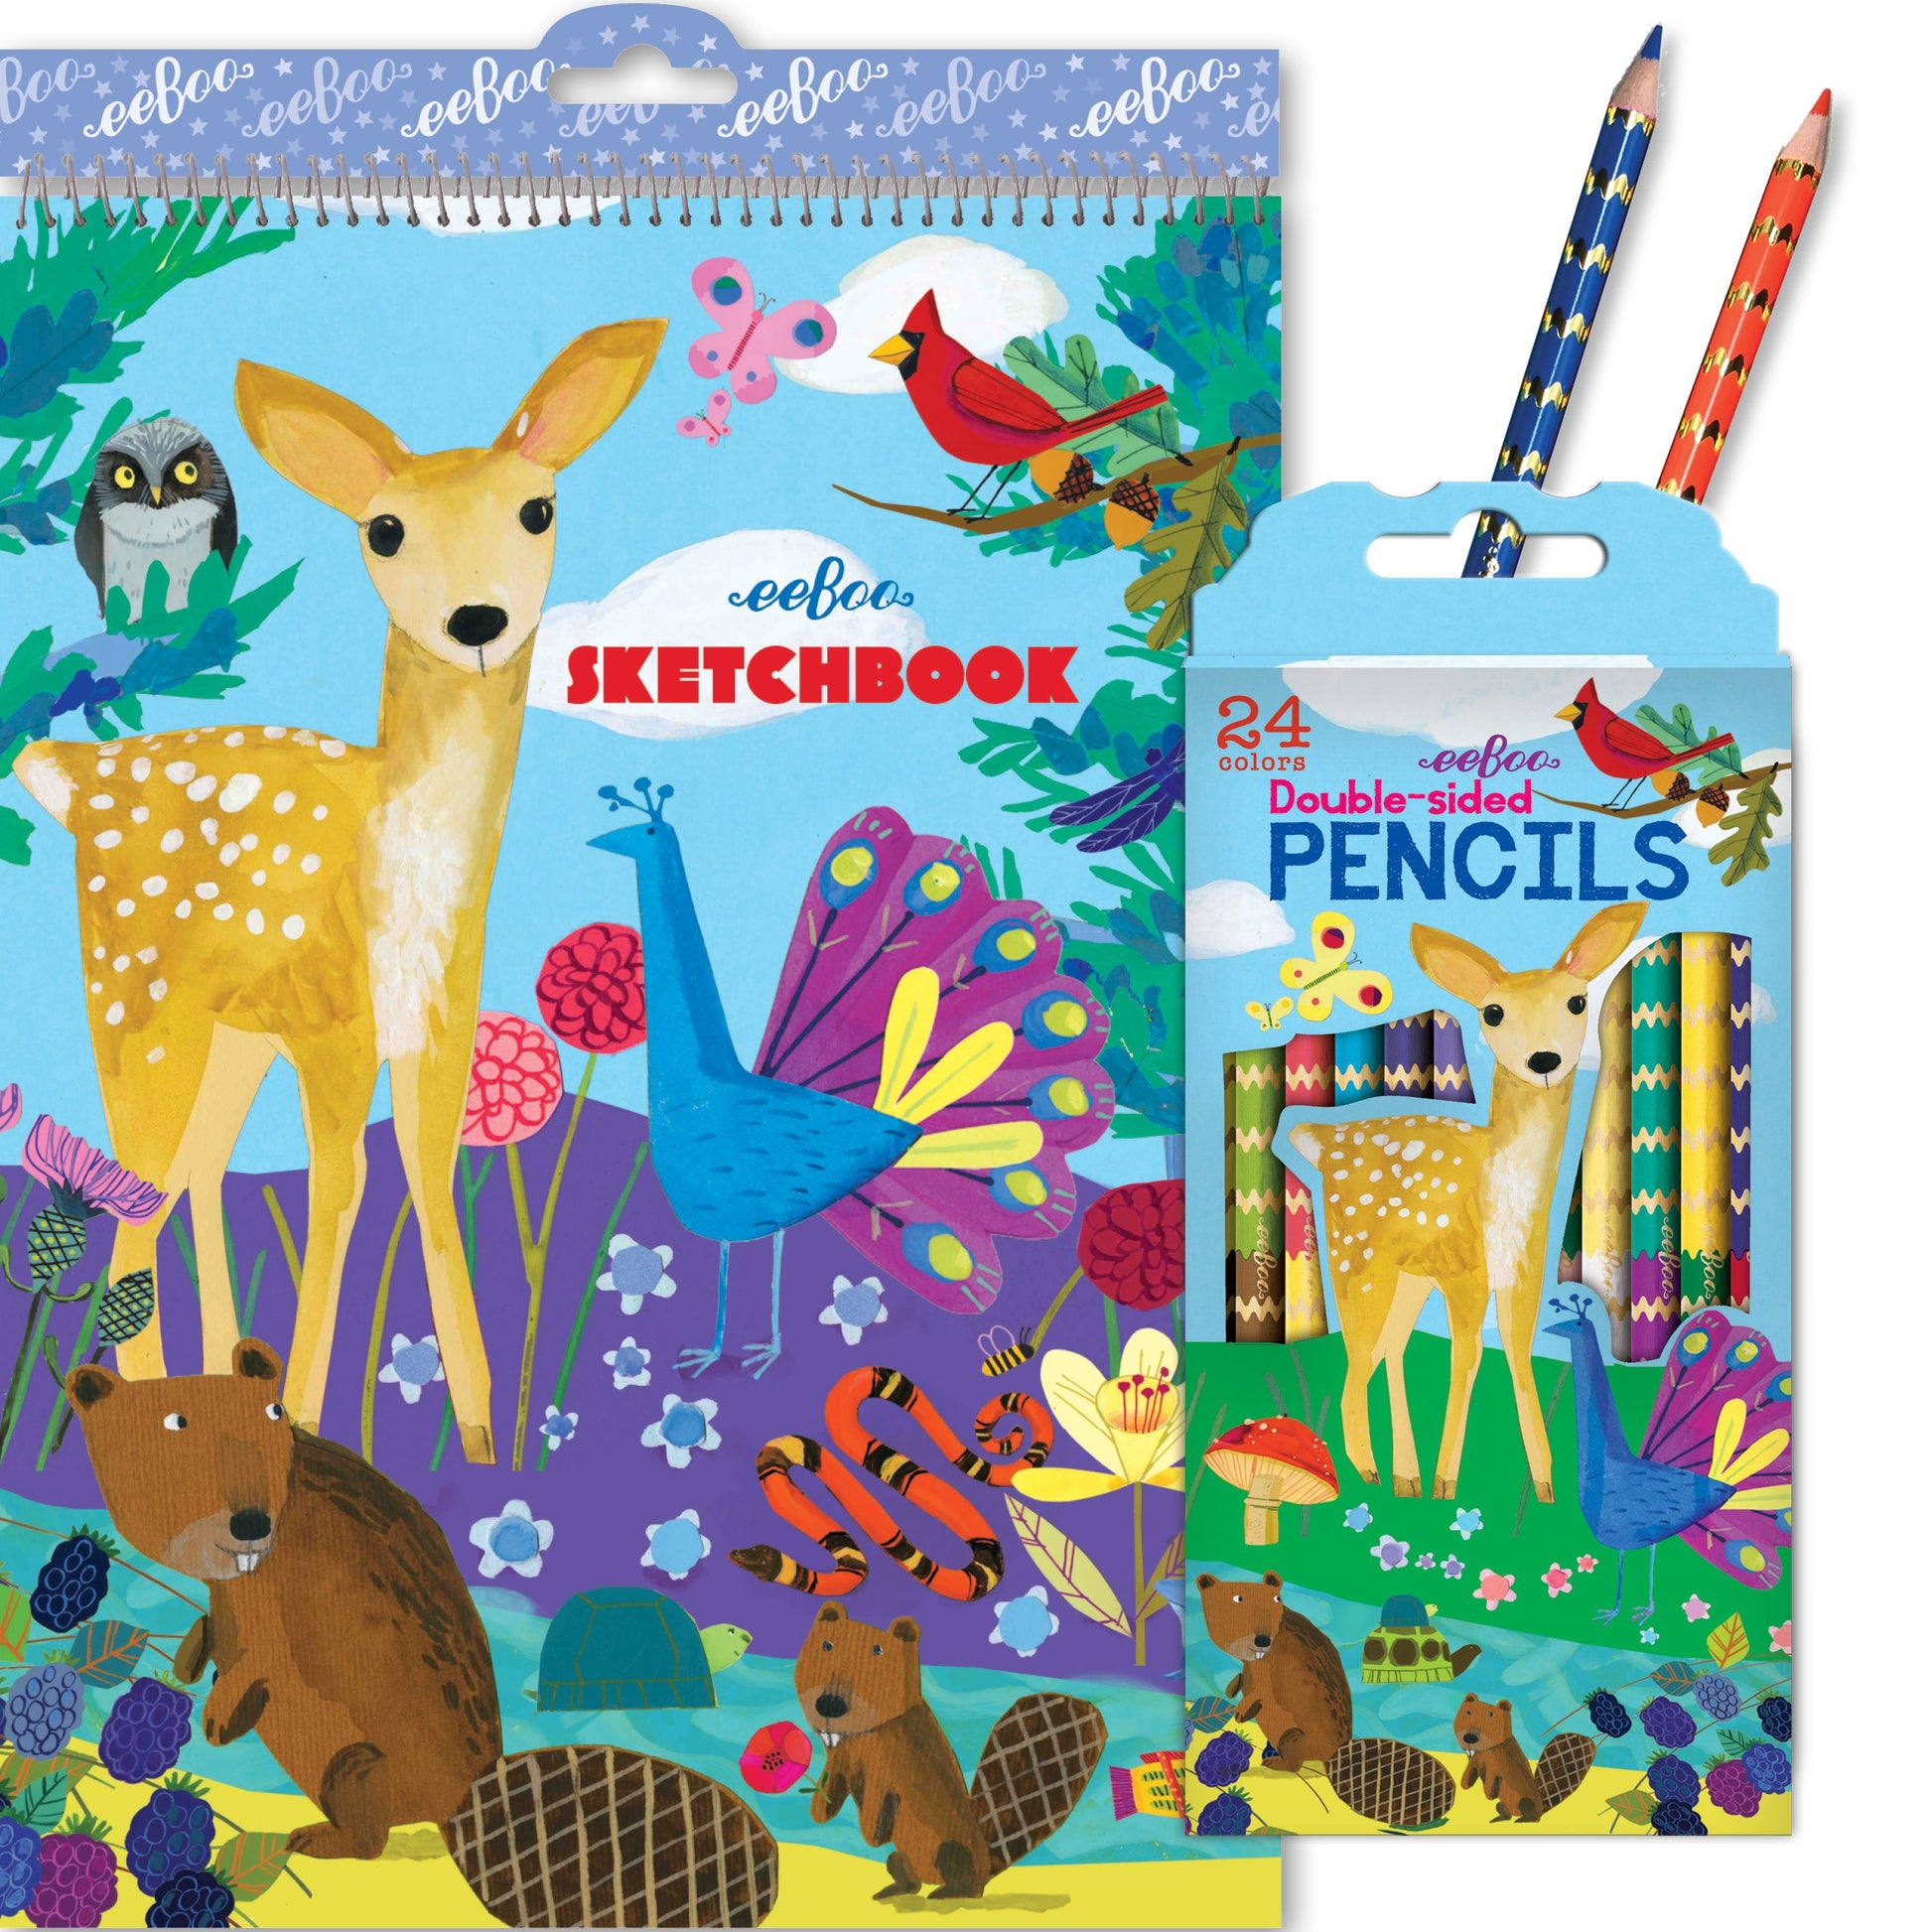 Life on Earth 12 Double-Sided Pencils and Sketchbook |  Gifts by eeBoo